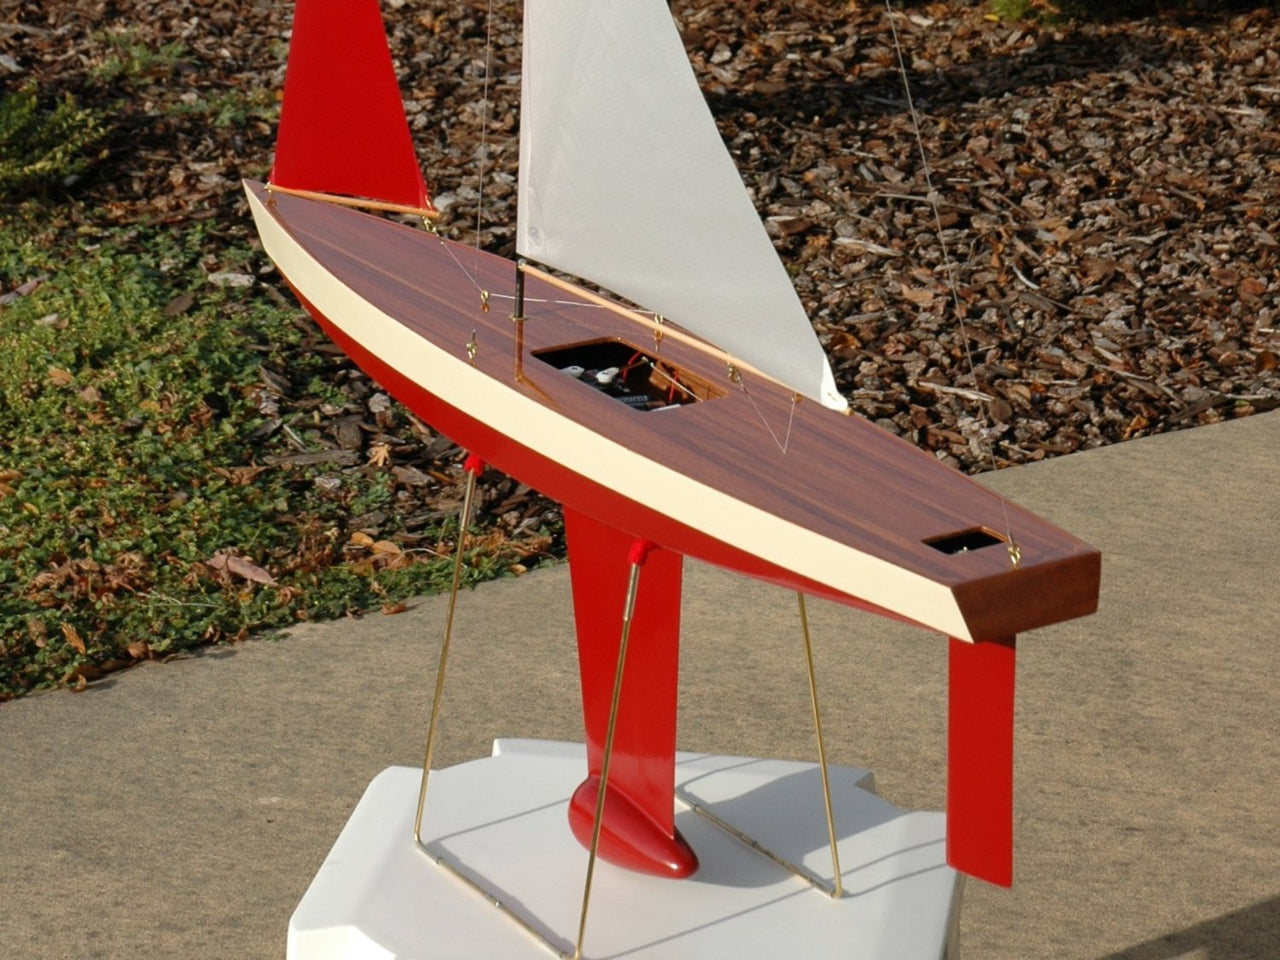 wooden rc boat